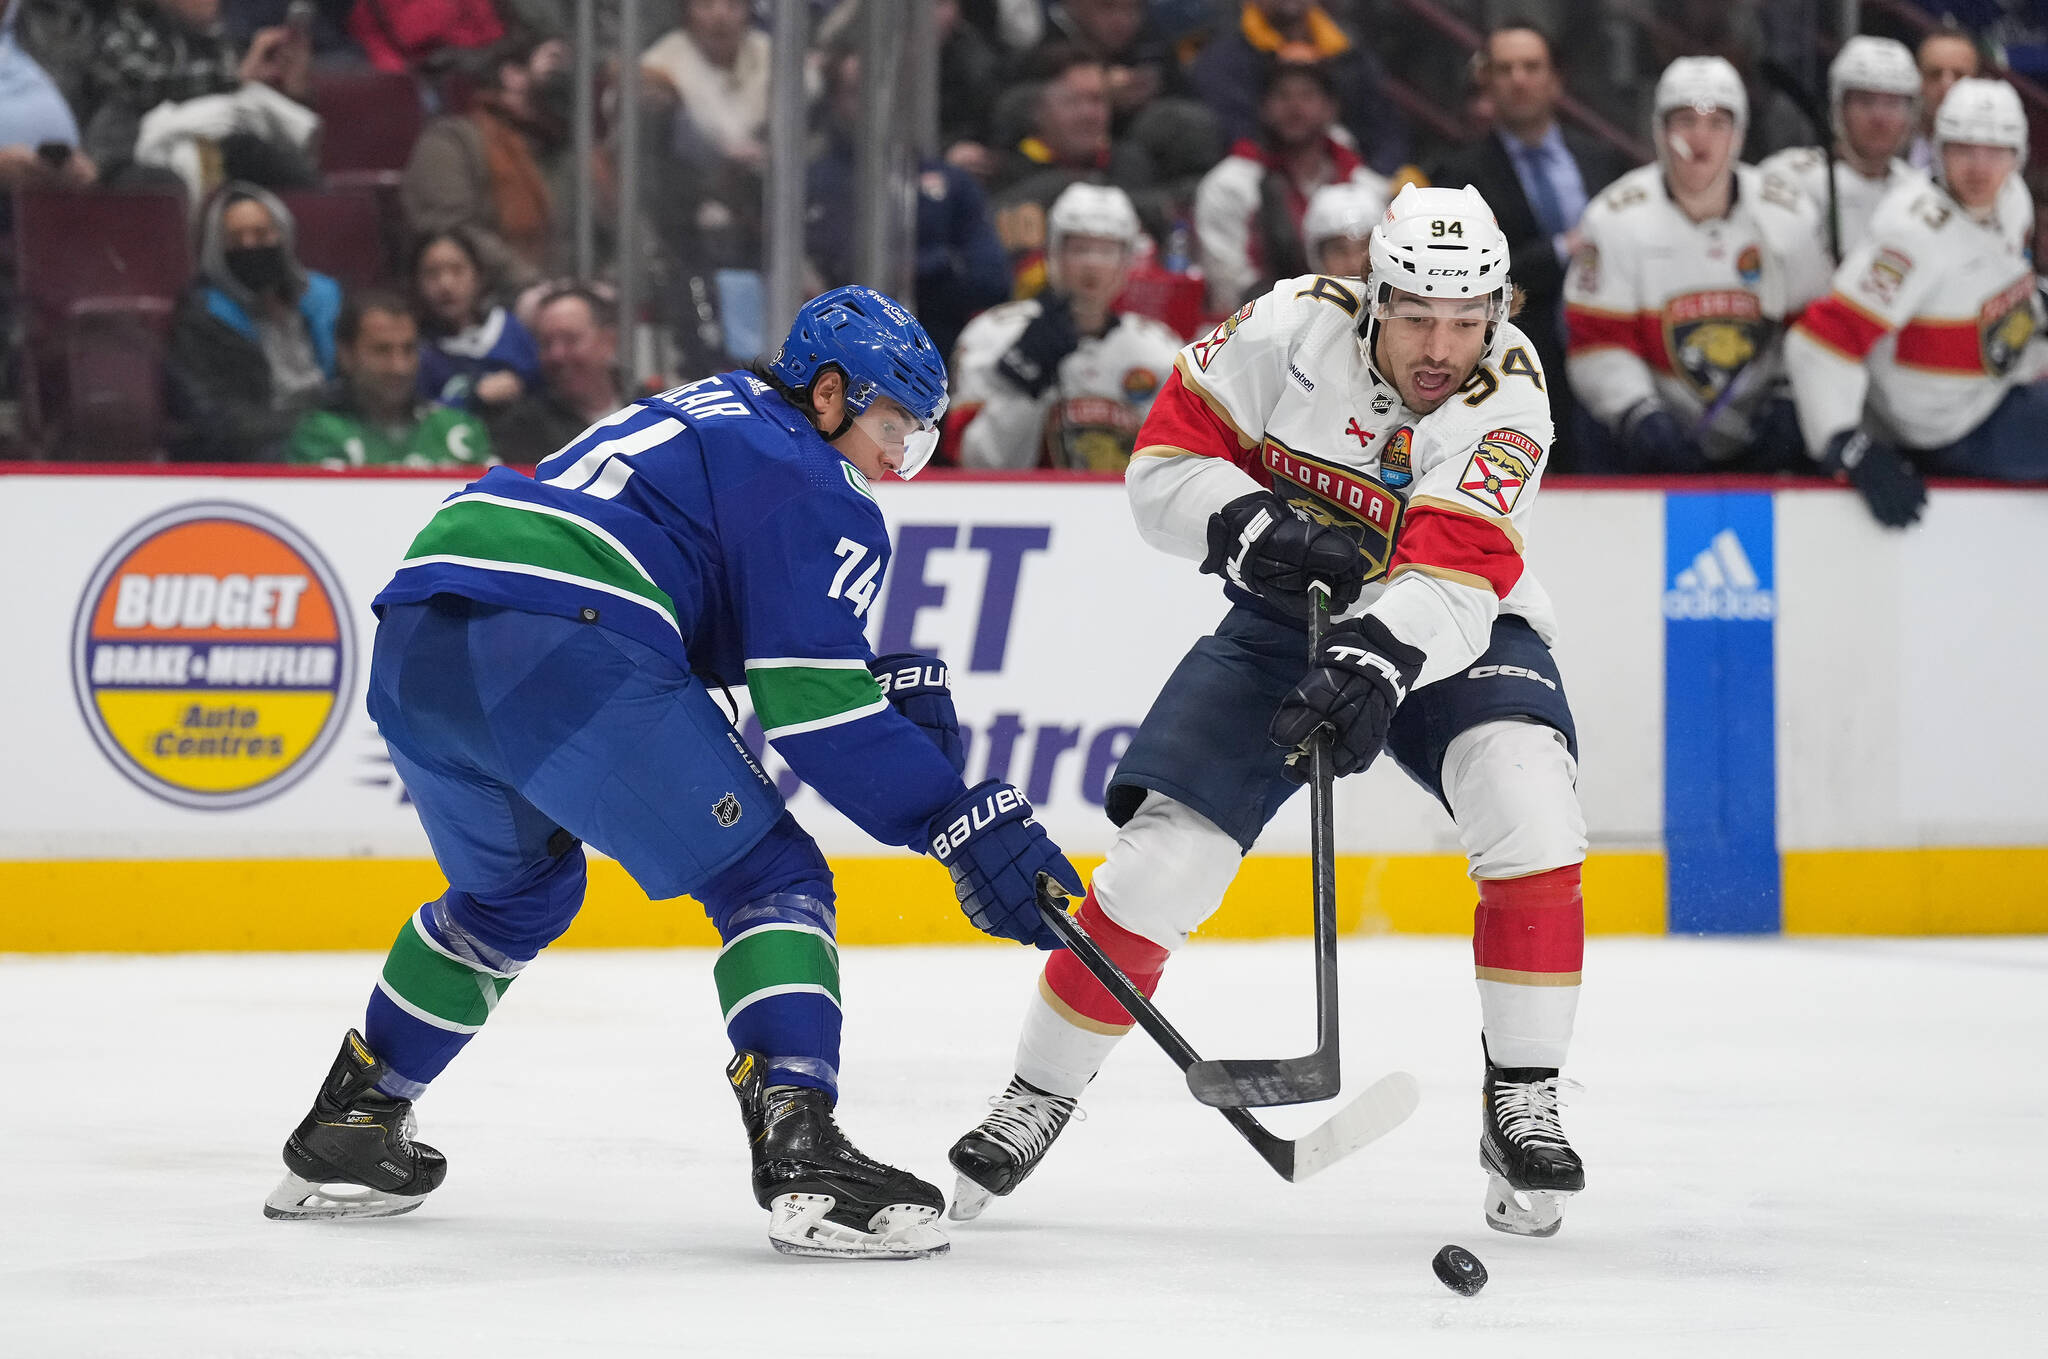 Vancouver Canucks’ Ethan Bear, left, and Florida Panthers’ Ryan Lomberg vie for the puck during the second period of an NHL hockey game in Vancouver, on Thursday, December 1, 2022. THE CANADIAN PRESS/Darryl Dyck